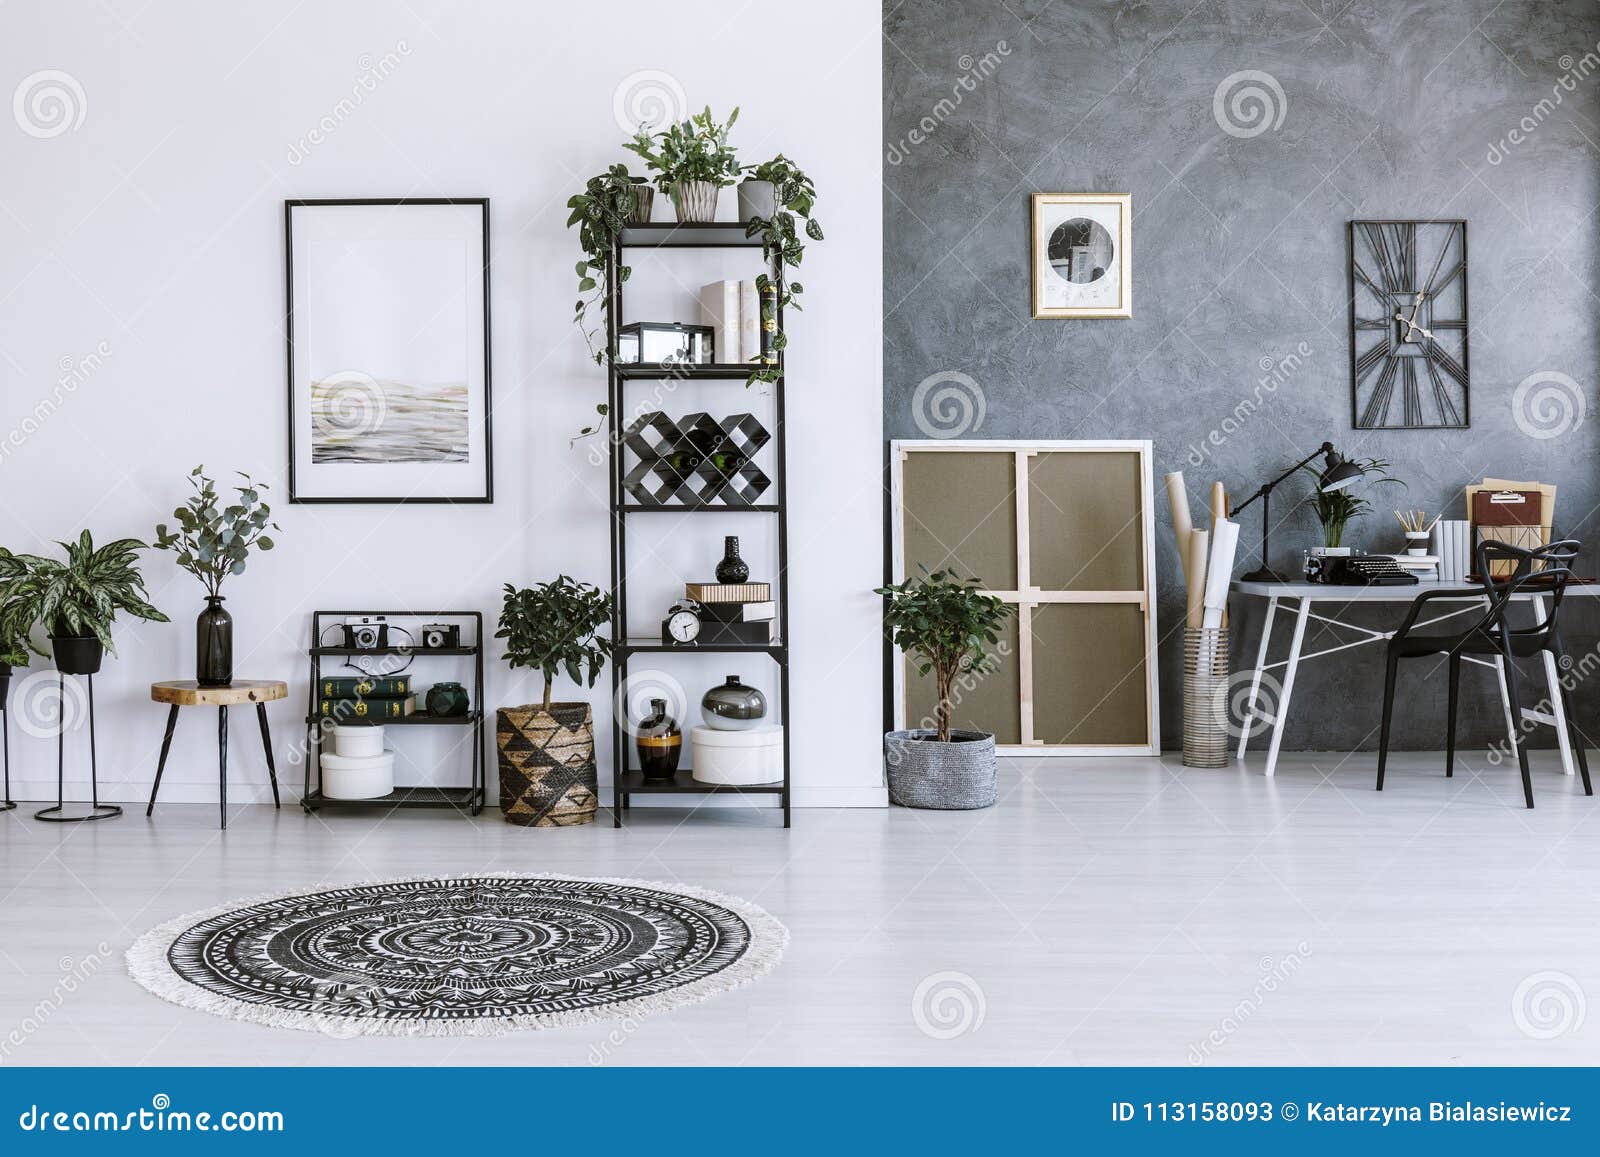 grey workspace interior with poster